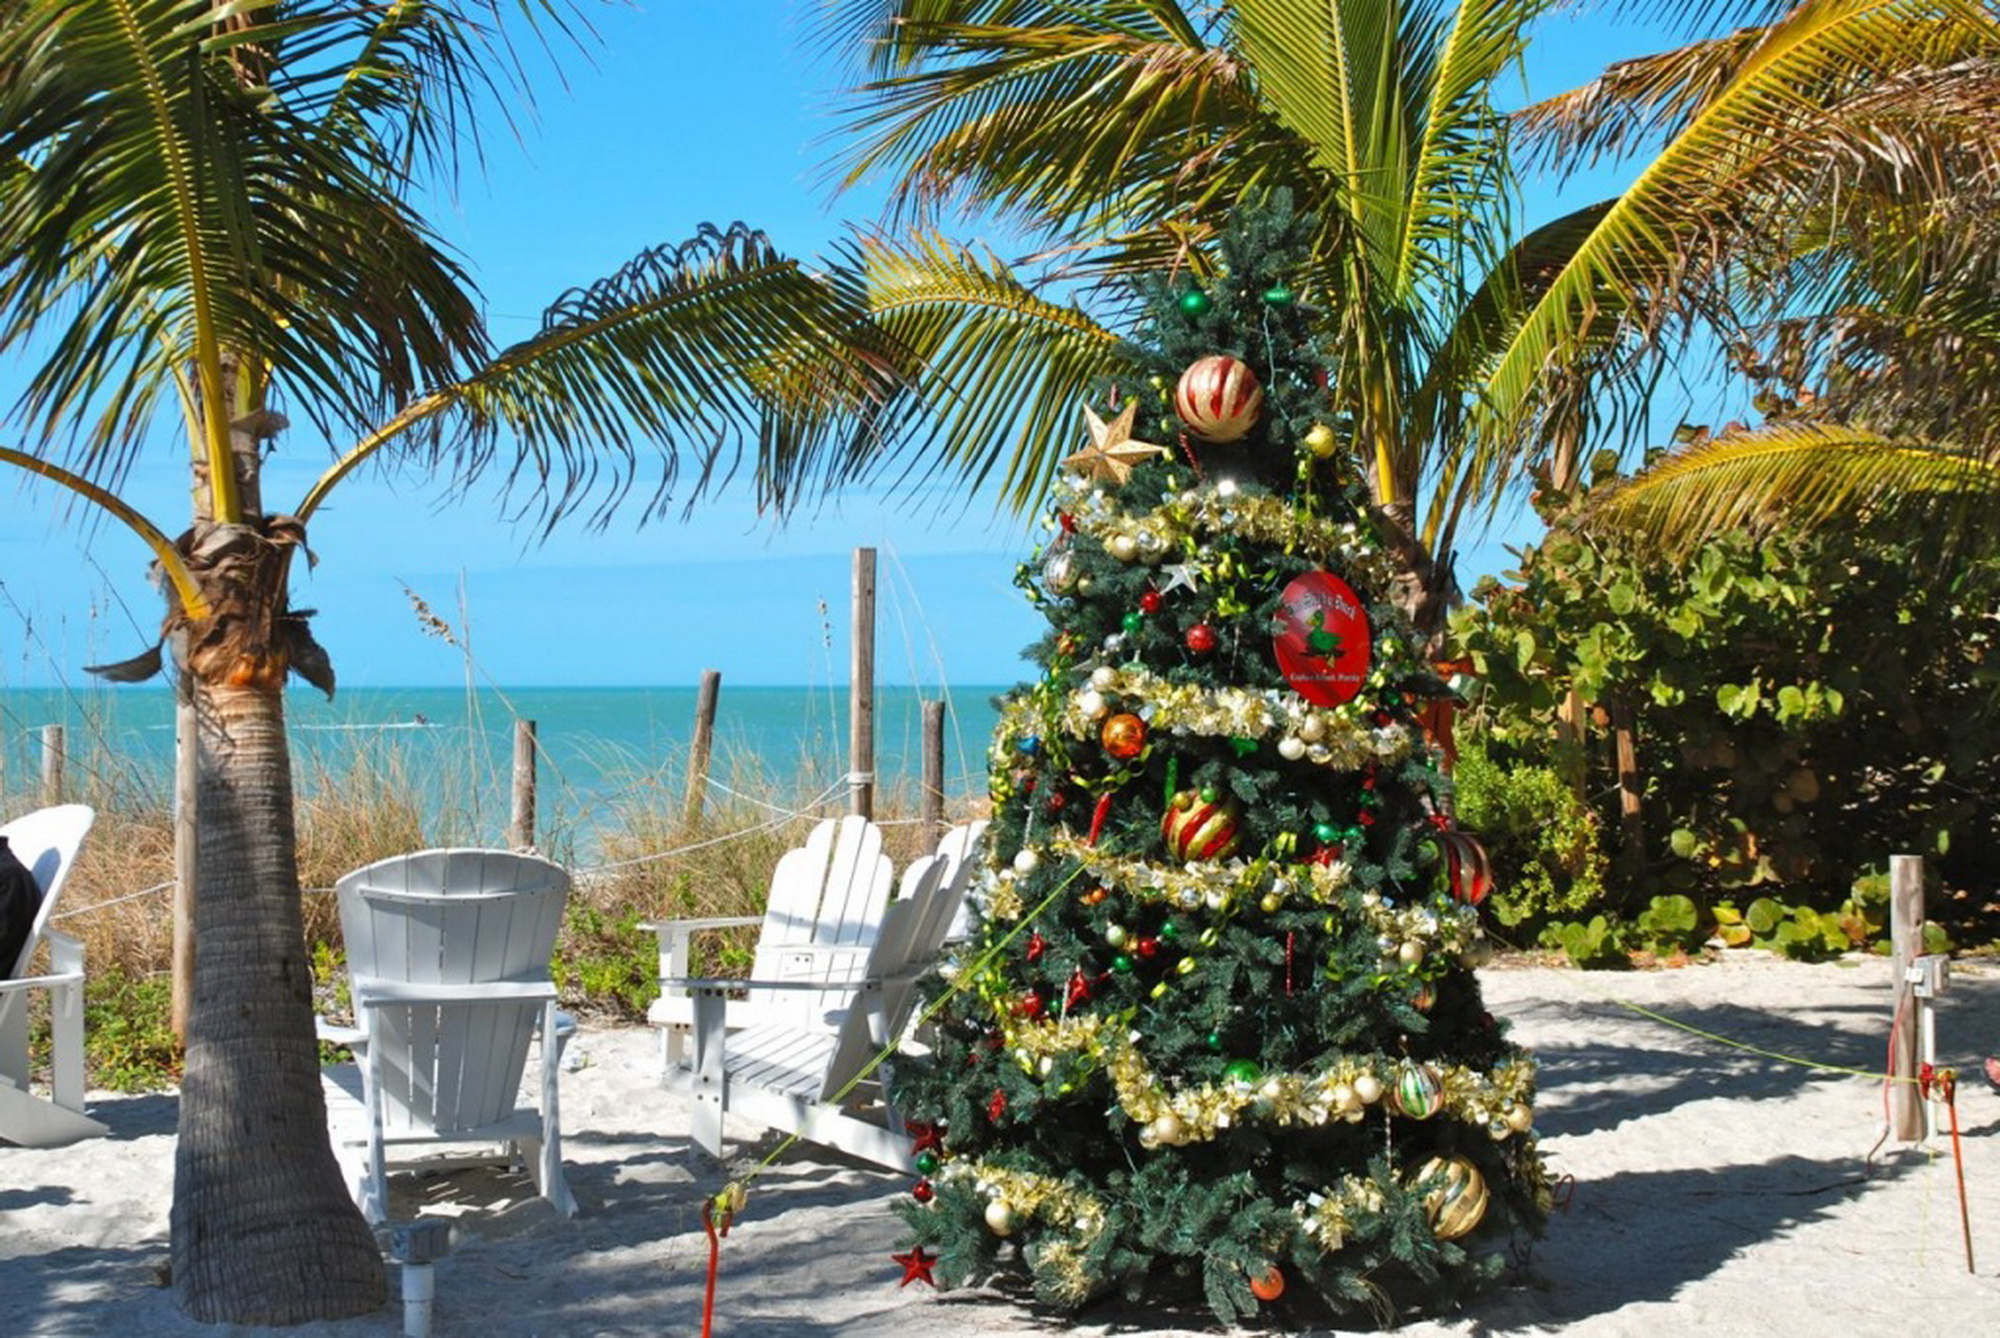 South Florida Vacation Rental Accommodations During The Holidays 1 Personal Injury Law Suit South Florida Injury Law Firm